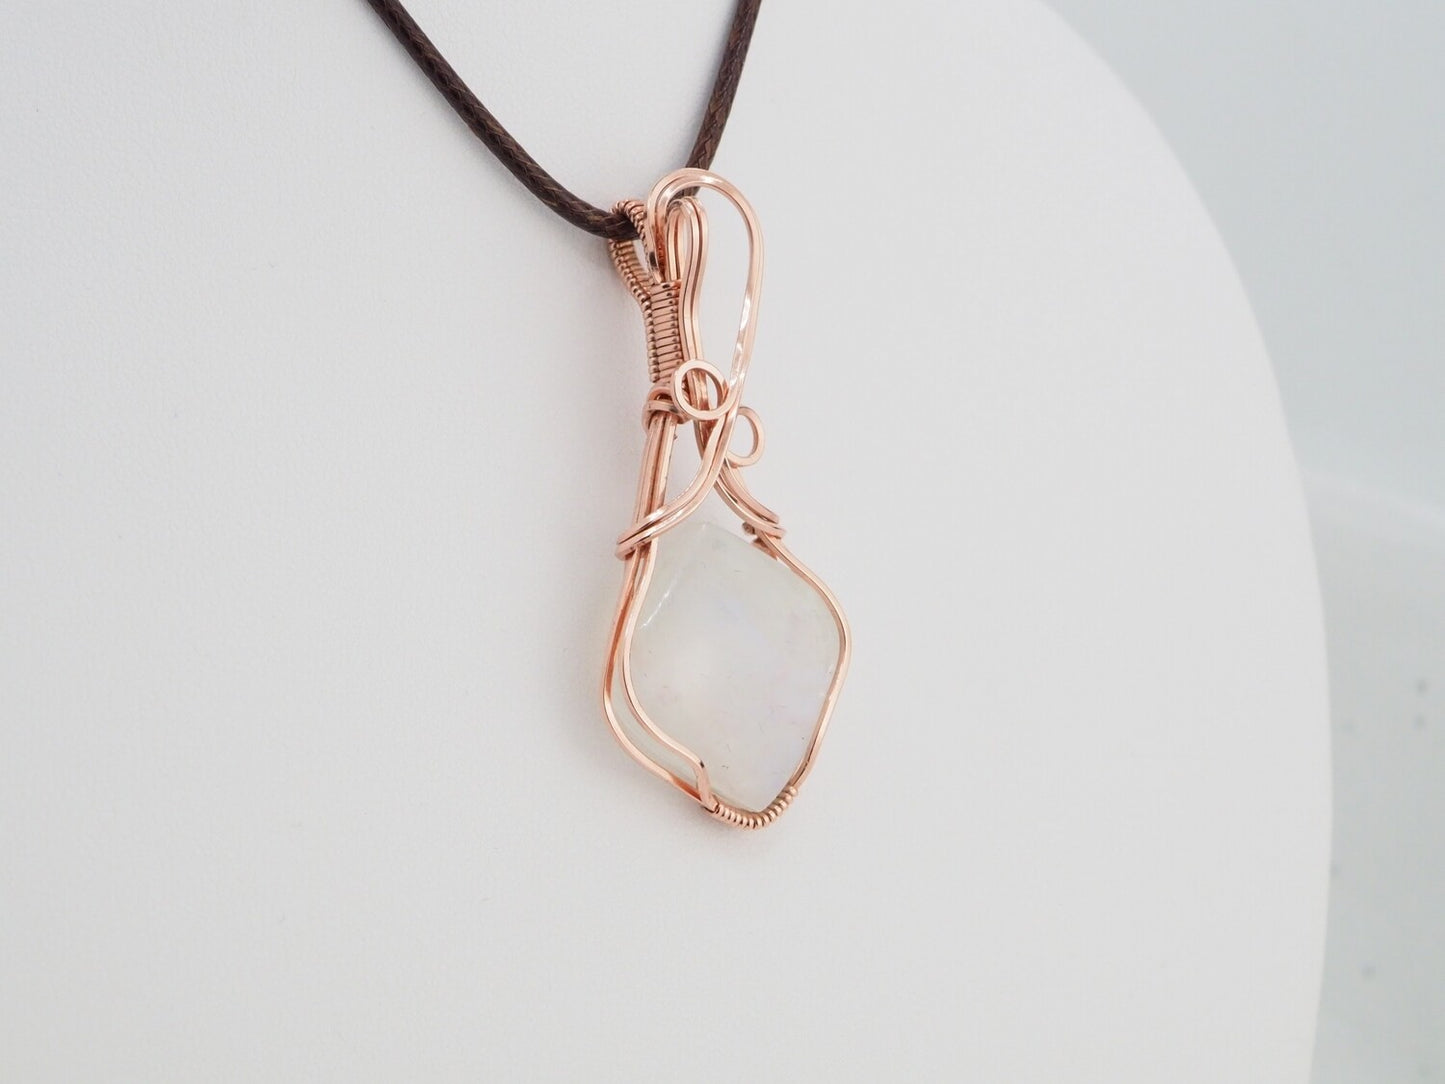 Rainbow Moonstone Pendant wrapped in copper